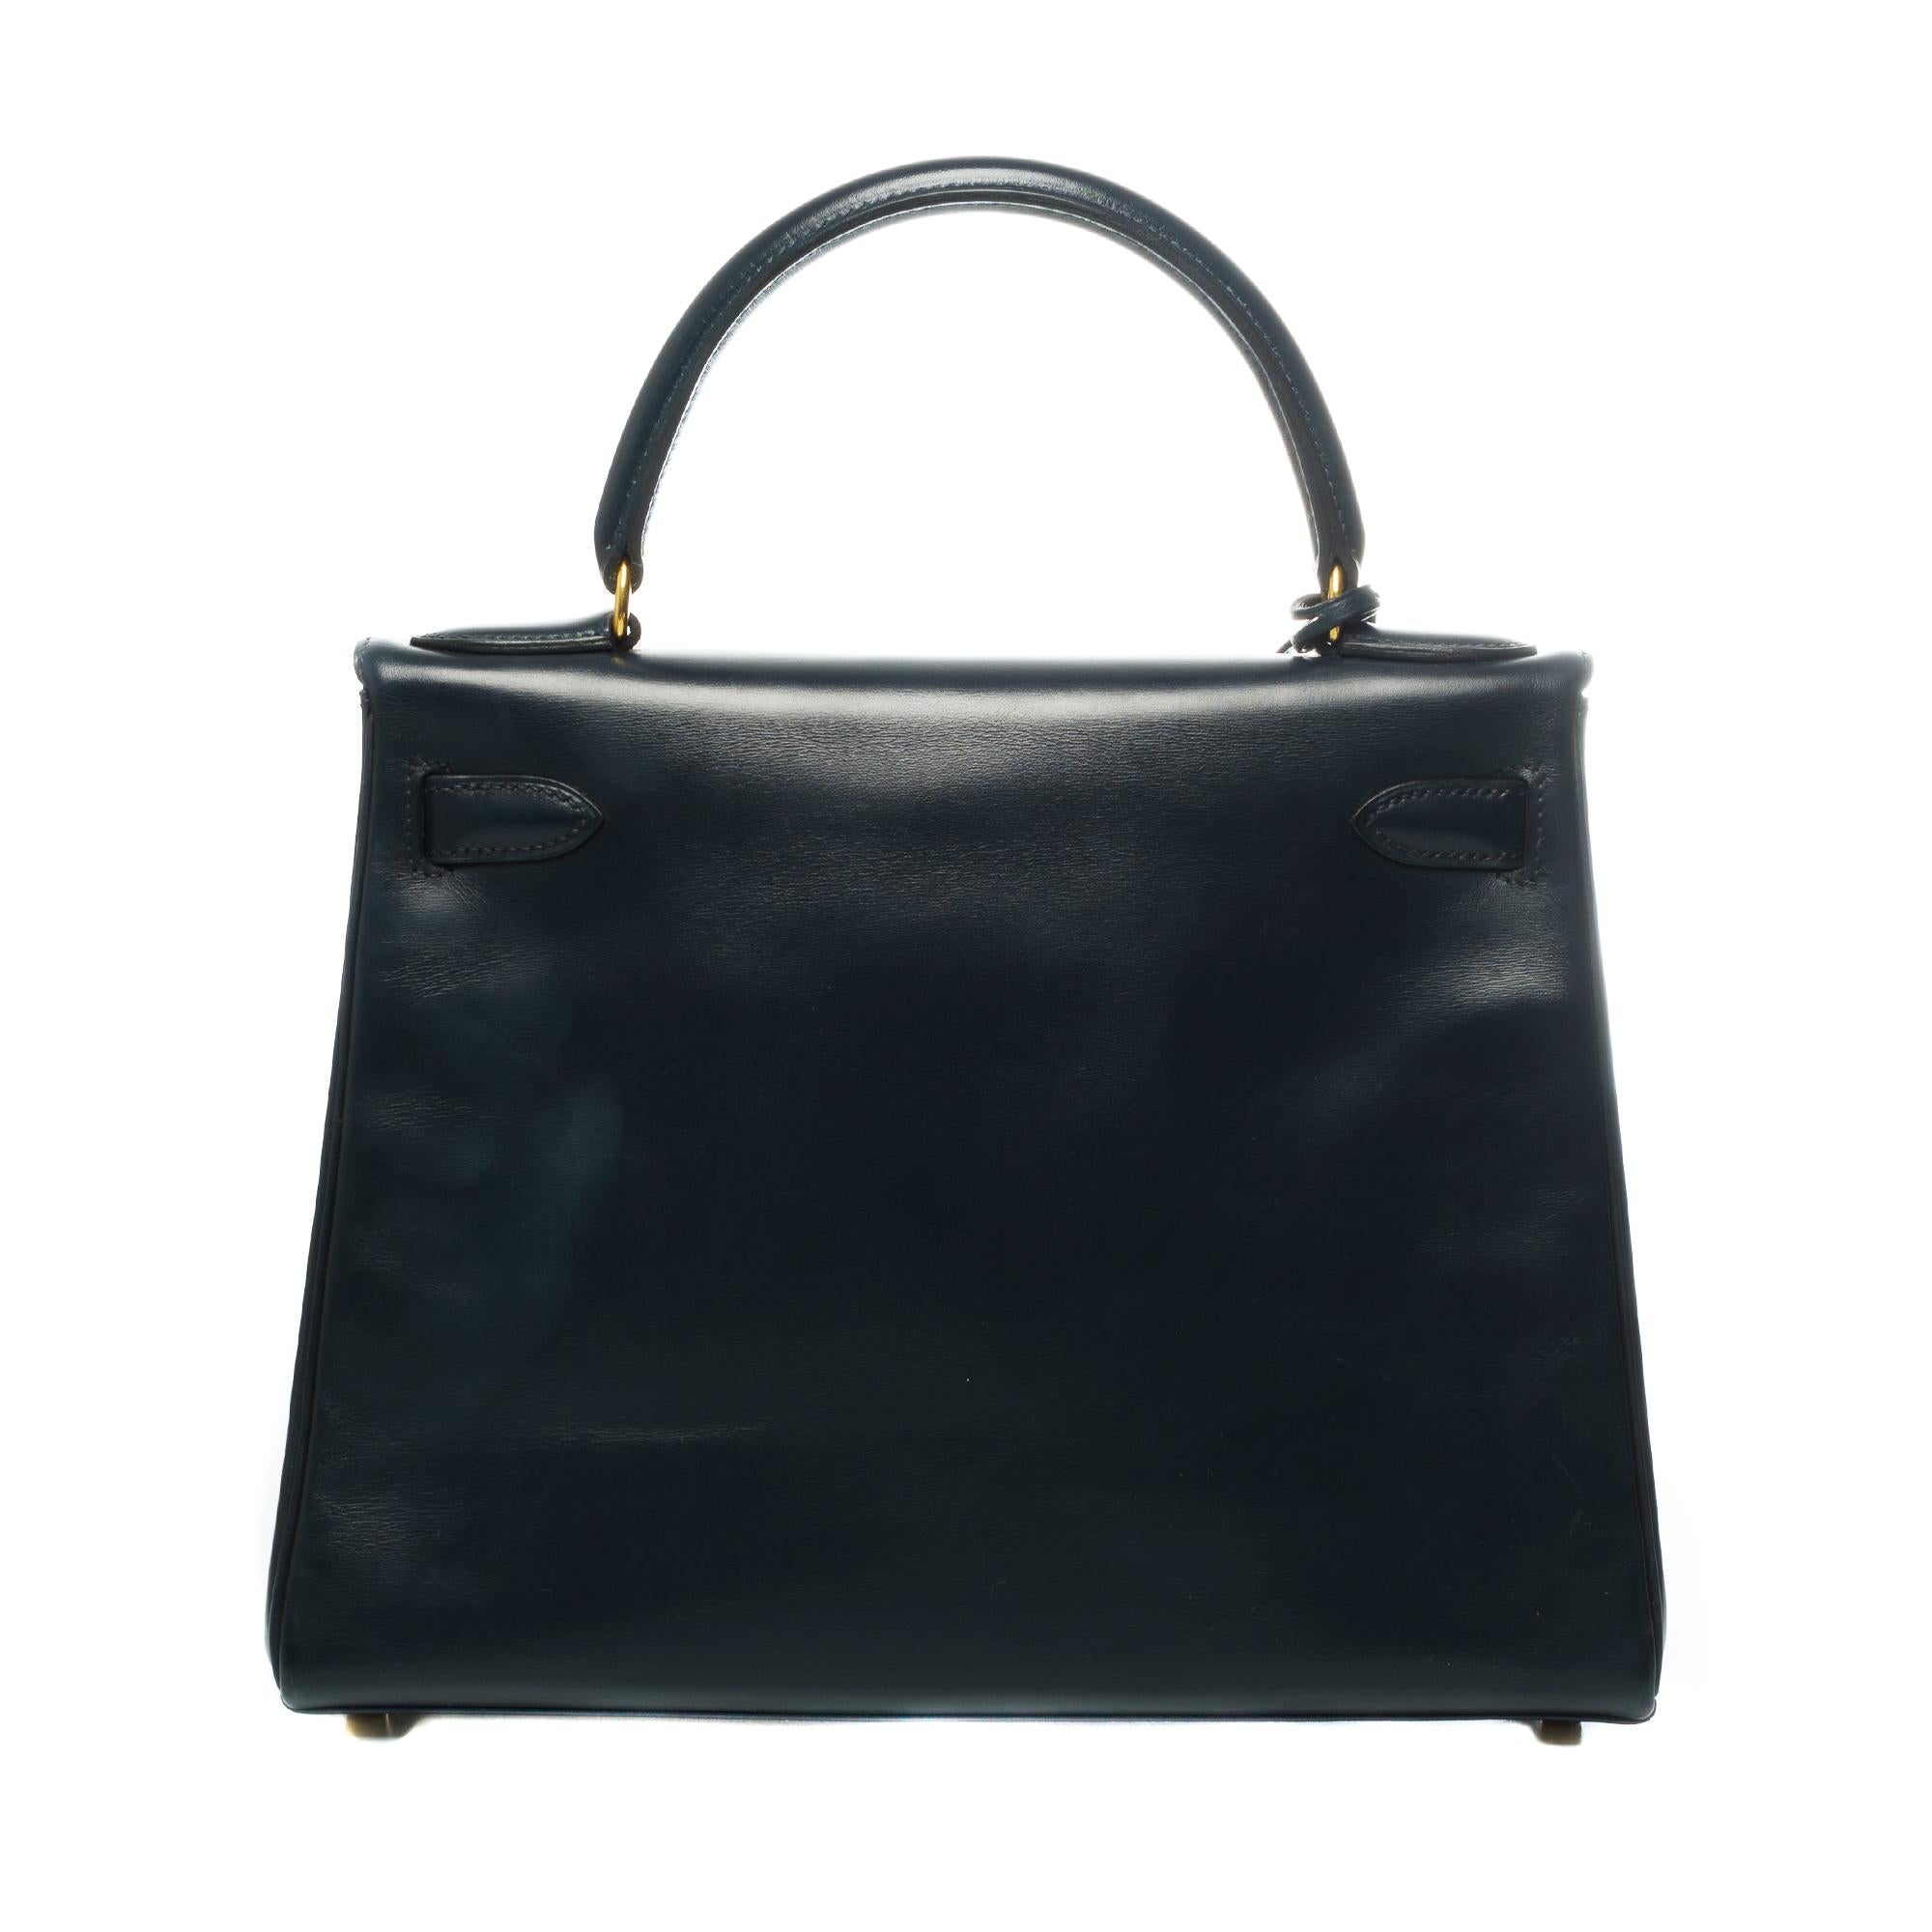 Splendid Hermes Kelly 28 handbag in navy box leather, gold plated metal hardware, simple handle in navy box leather, shoulder strap handle in navy box allowing a hand or shoulder strap.

Closure by flap.
Lining in navy leather one zipped pocket, one